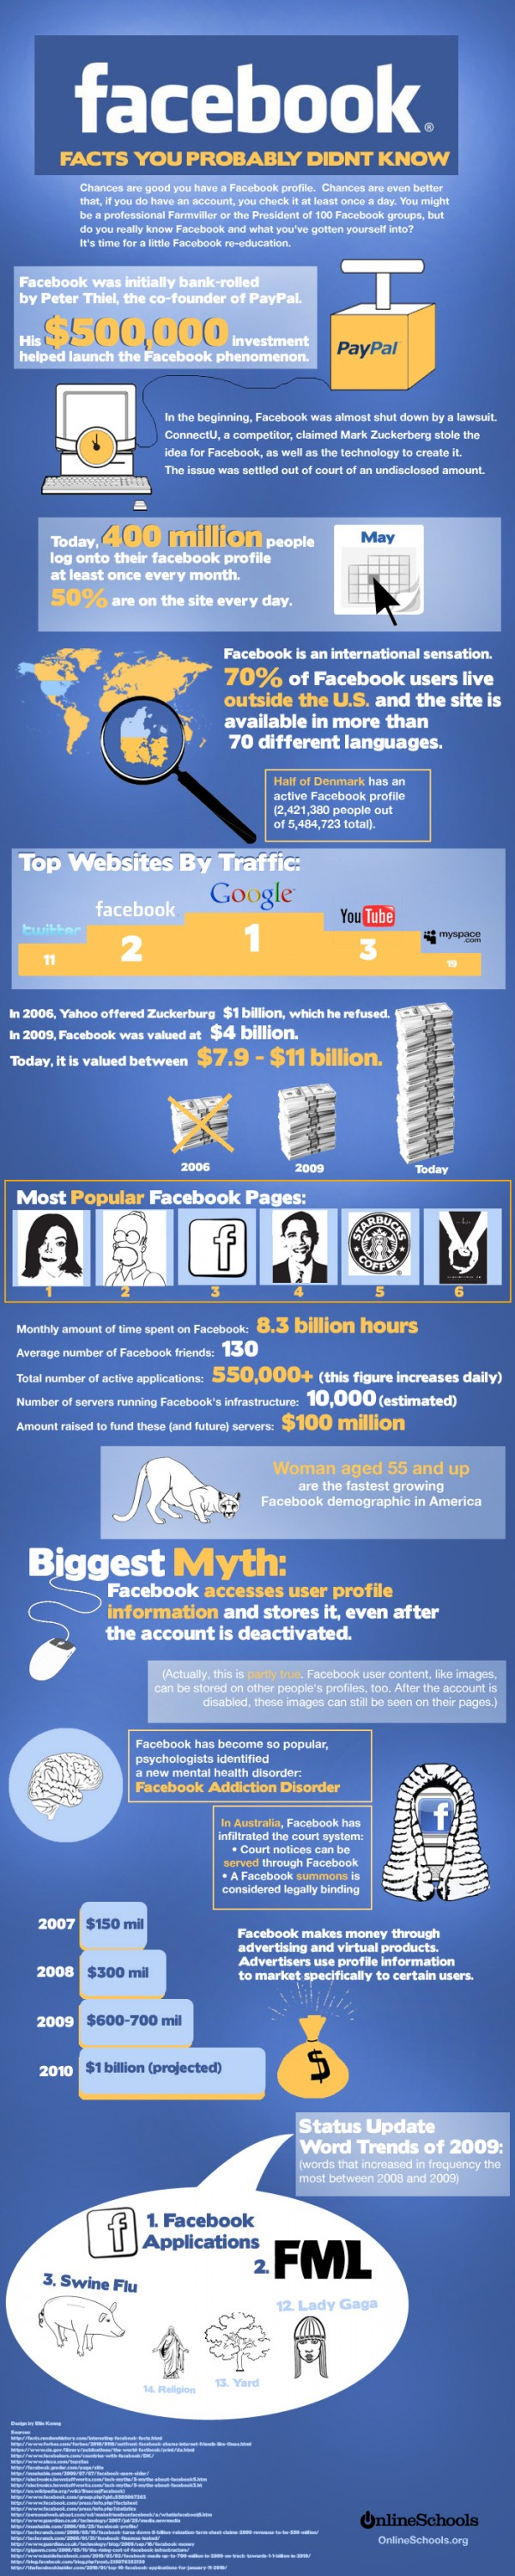 Amazing Facts About Facebook You Probably Did't Know